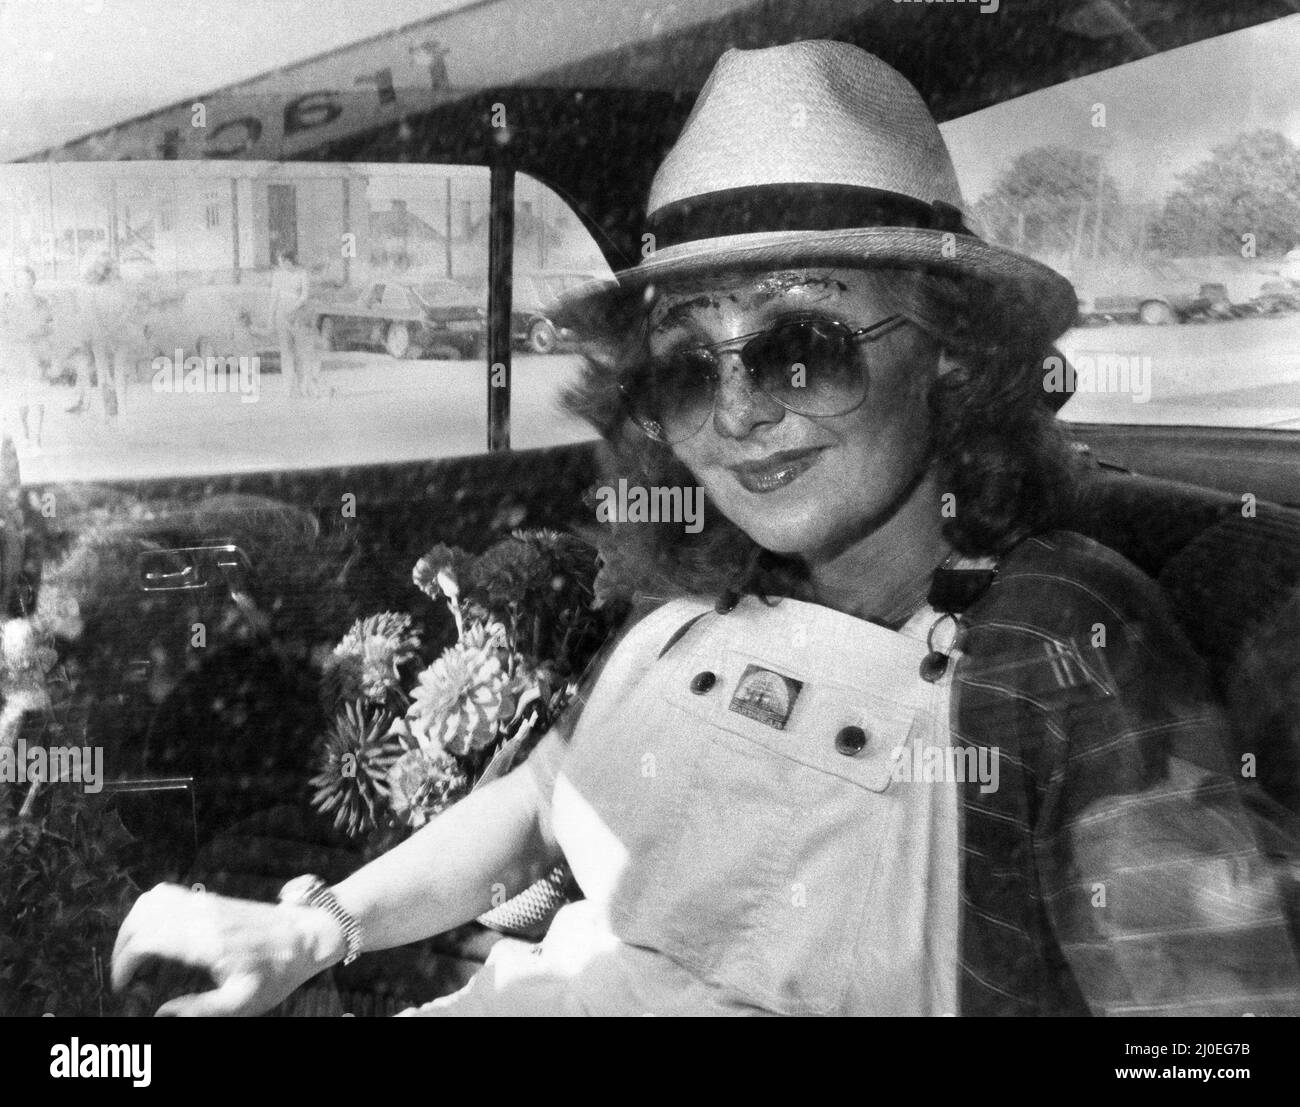 Singer Lulu in the back of a car wearing a trilby hat, sunglasses and dungarees, with a large bunch of flowers.   September 1979 P035550 Stock Photo